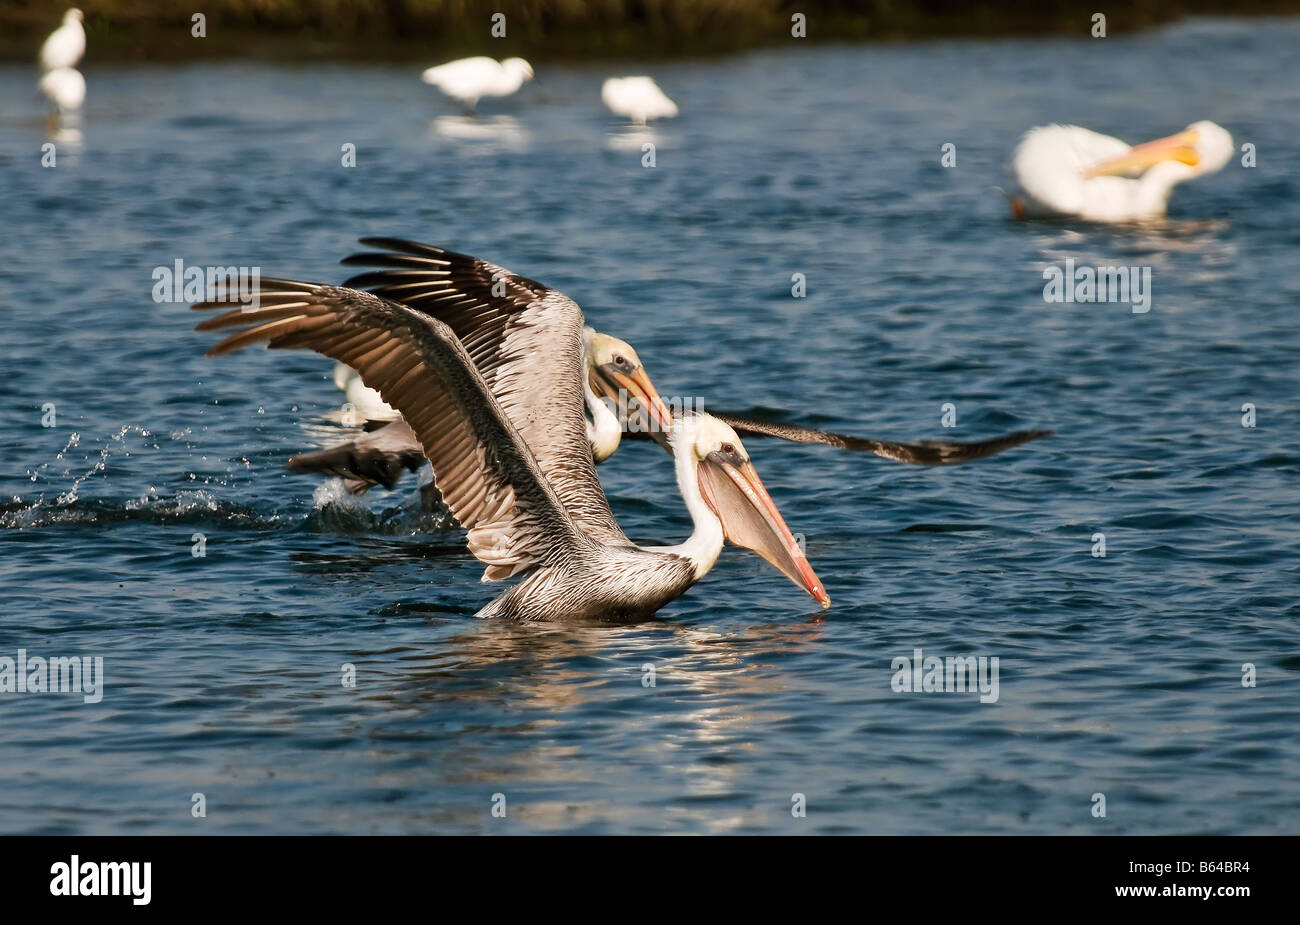 Two California Brown Pelicans at play. Stock Photography by cahyman. Stock Photo